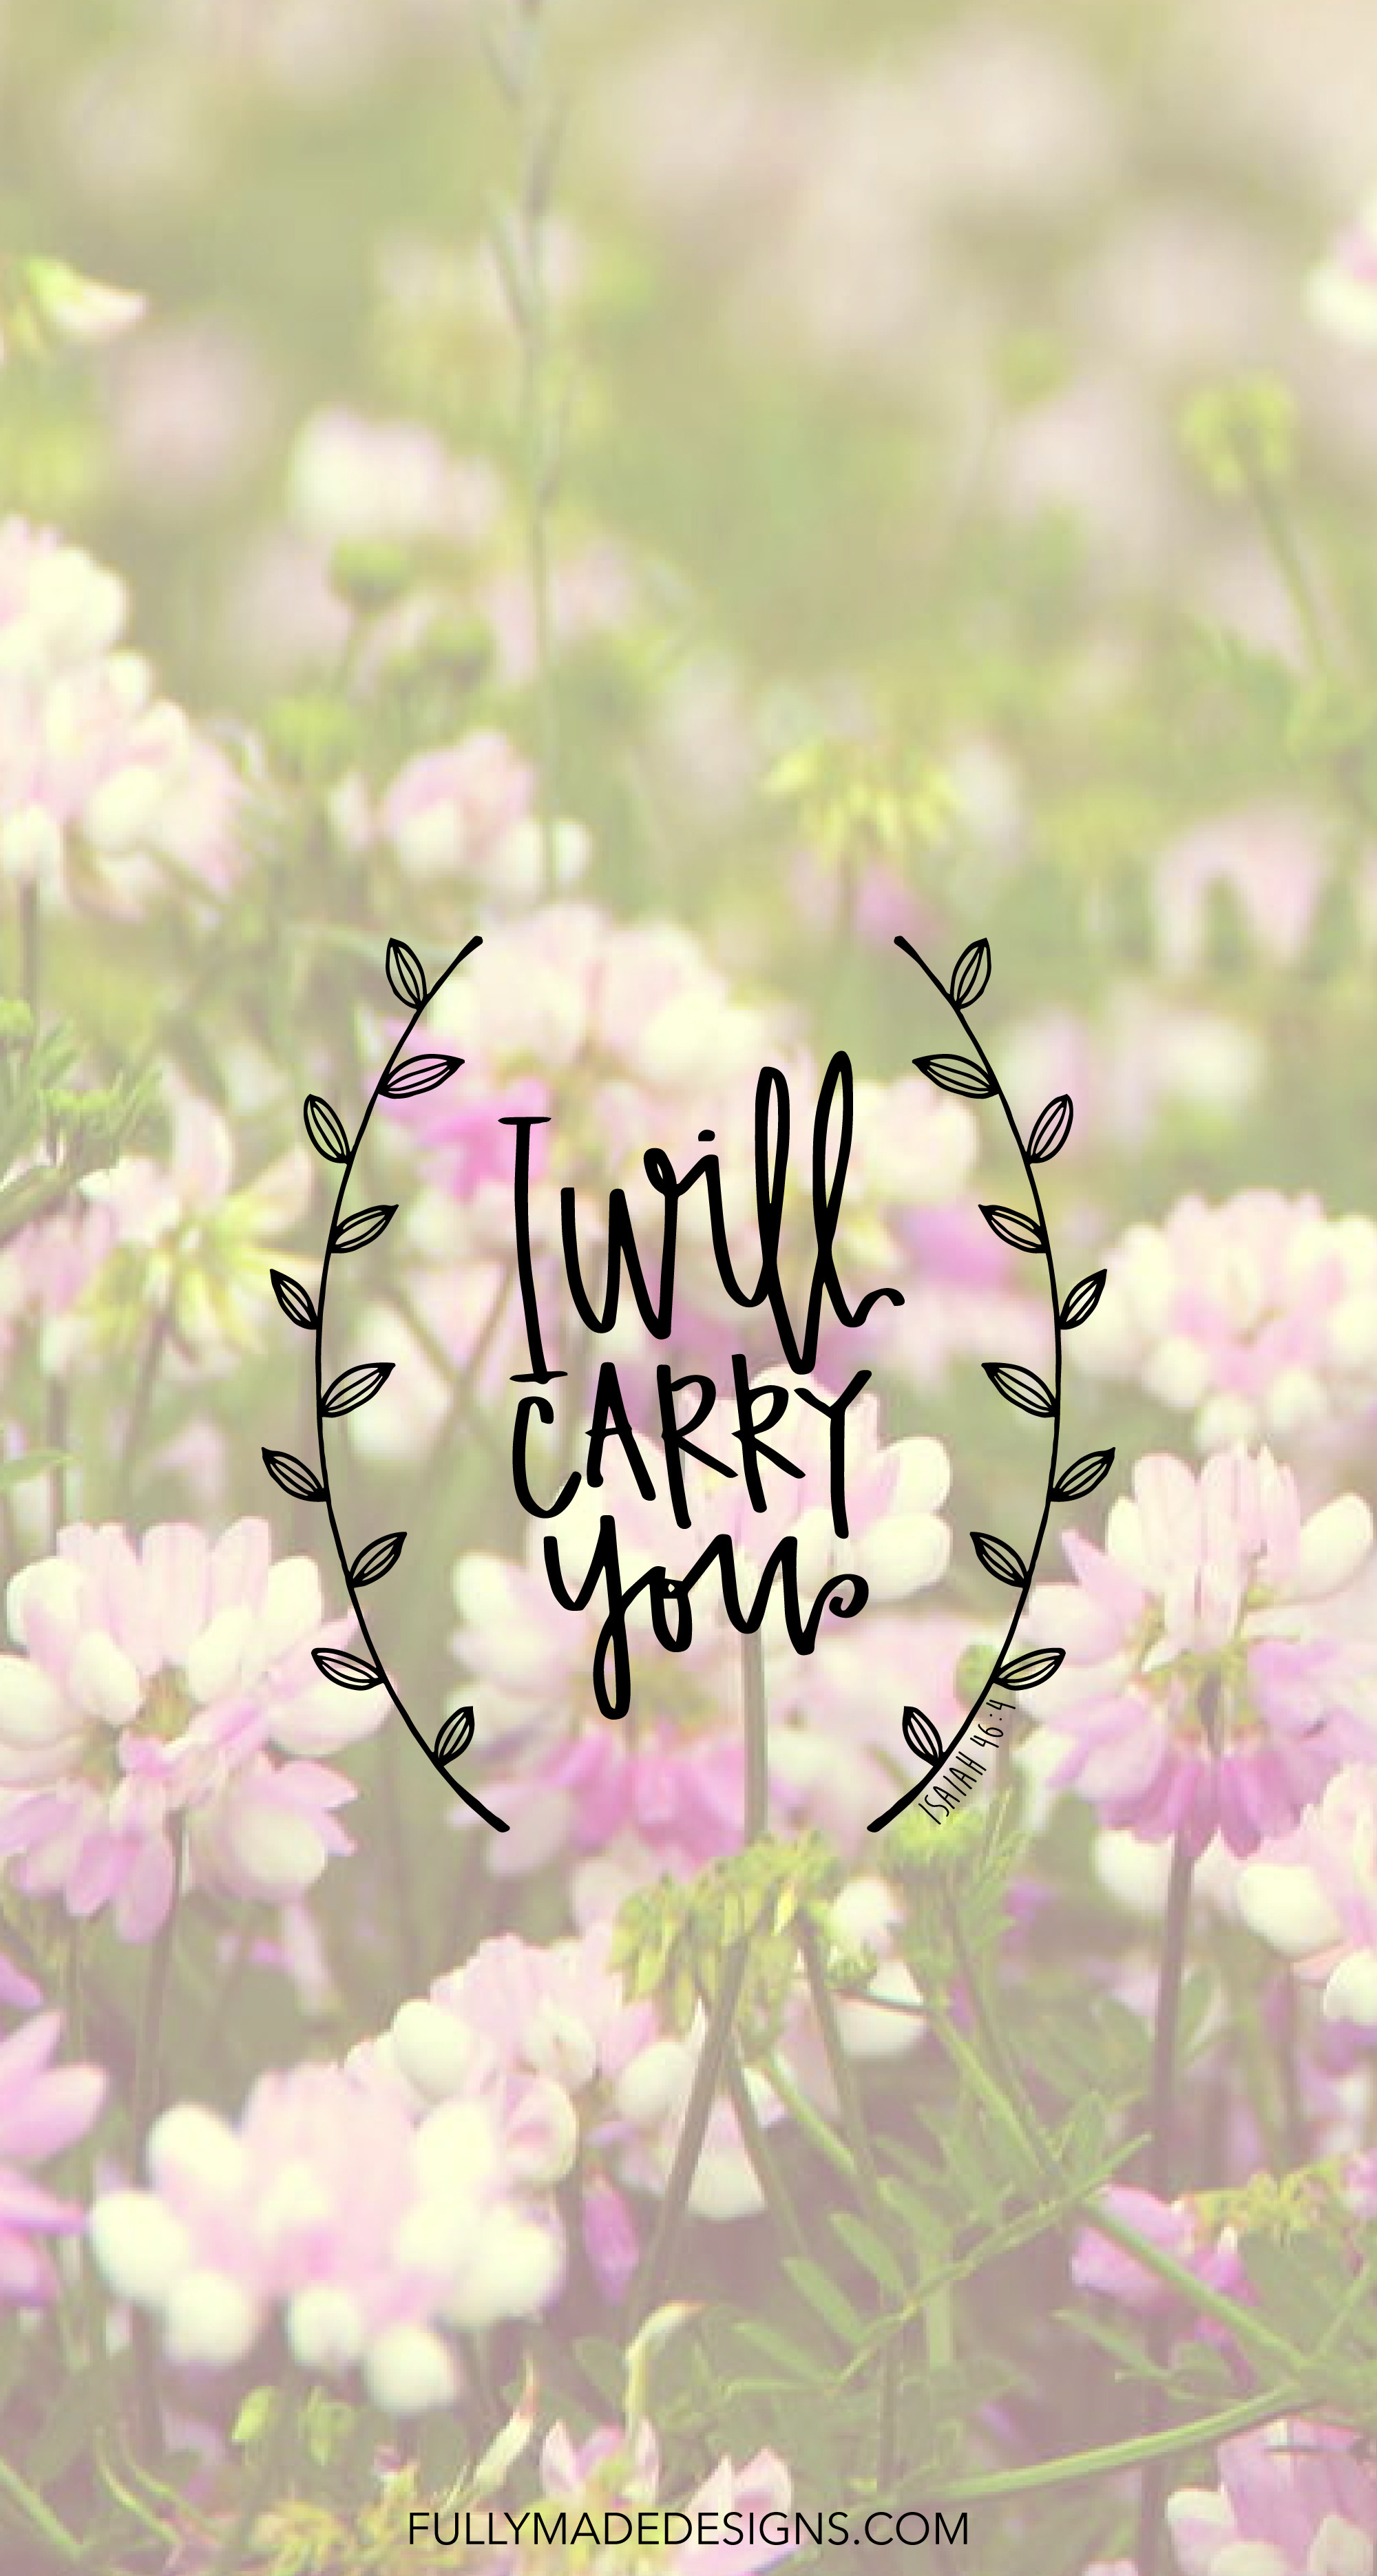 2000x3742 FREE iphone wallpaper - I Will Carry You - Isaiah 46:4 || fullymadedesigns